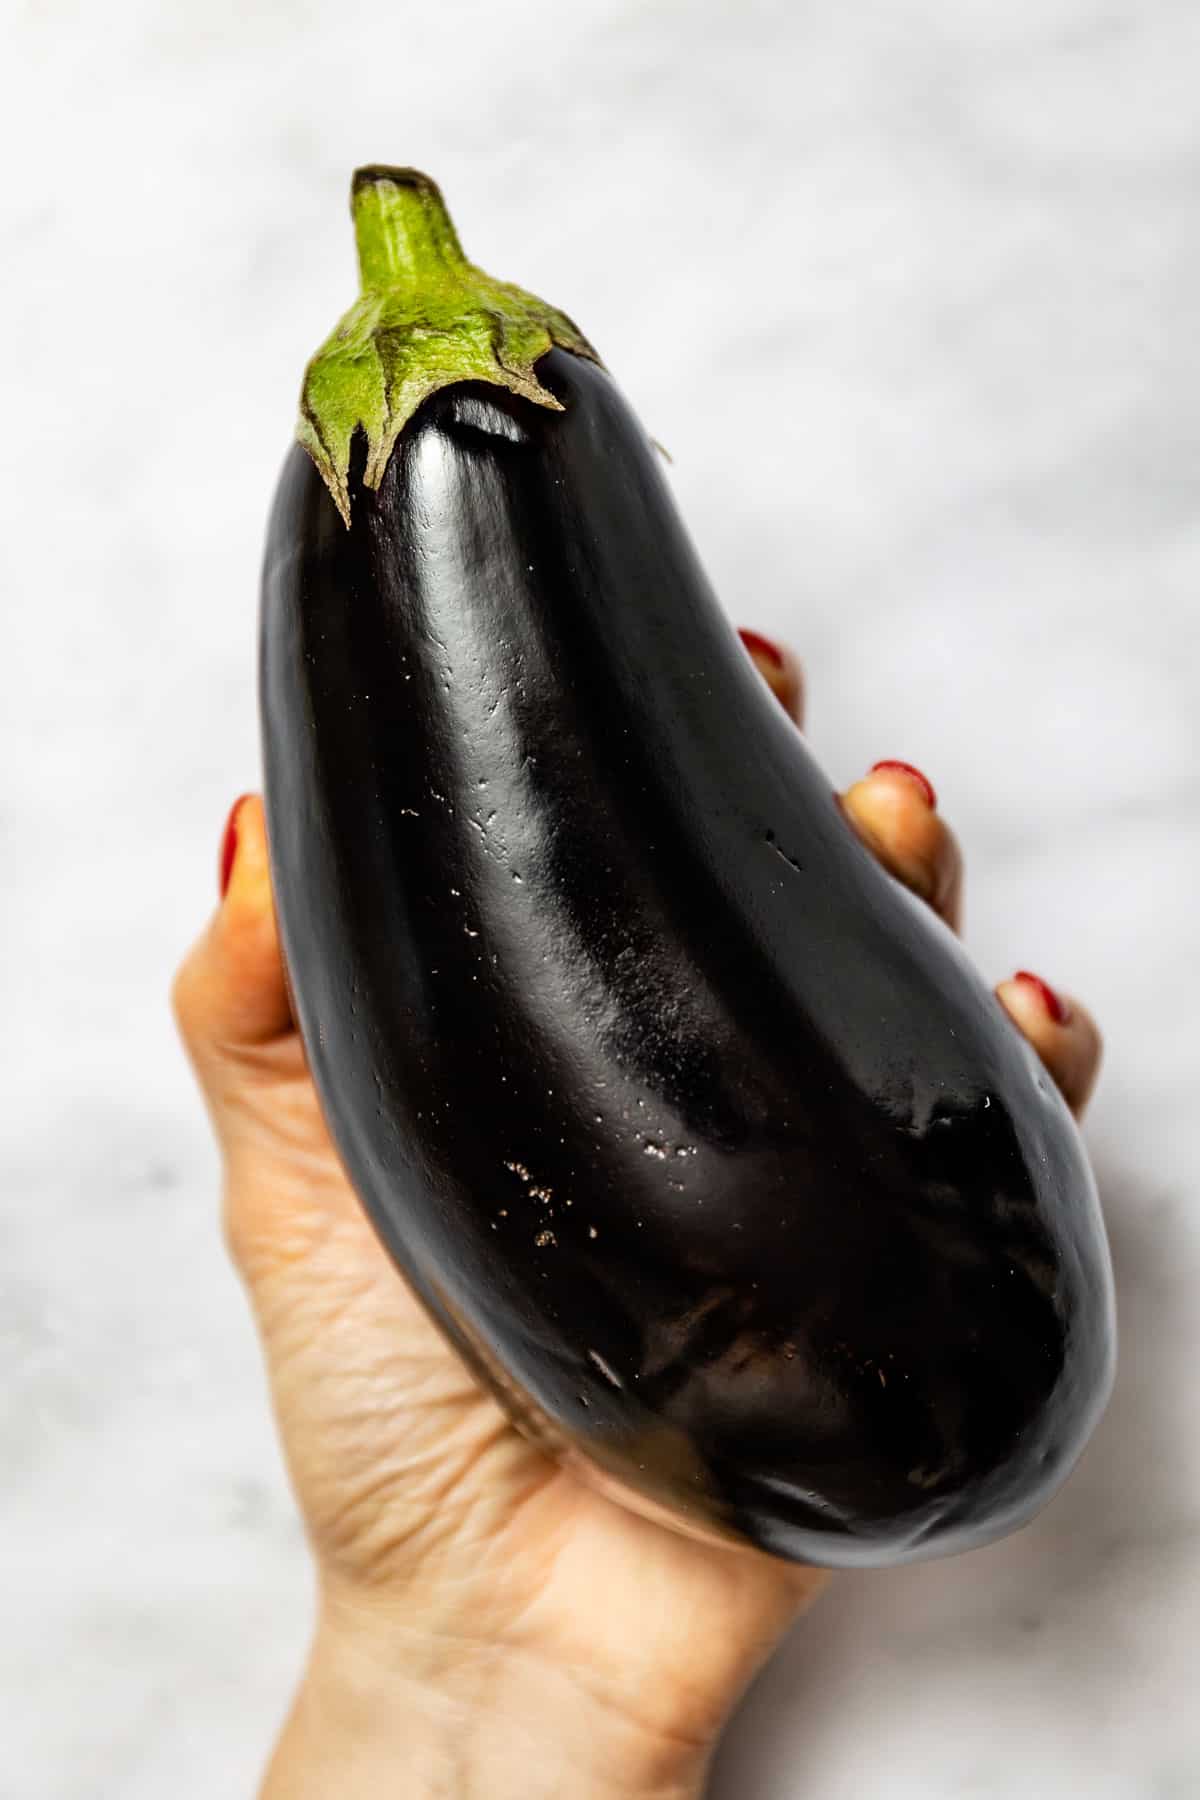 An Italian eggplant in the hands of a woman from the top view.